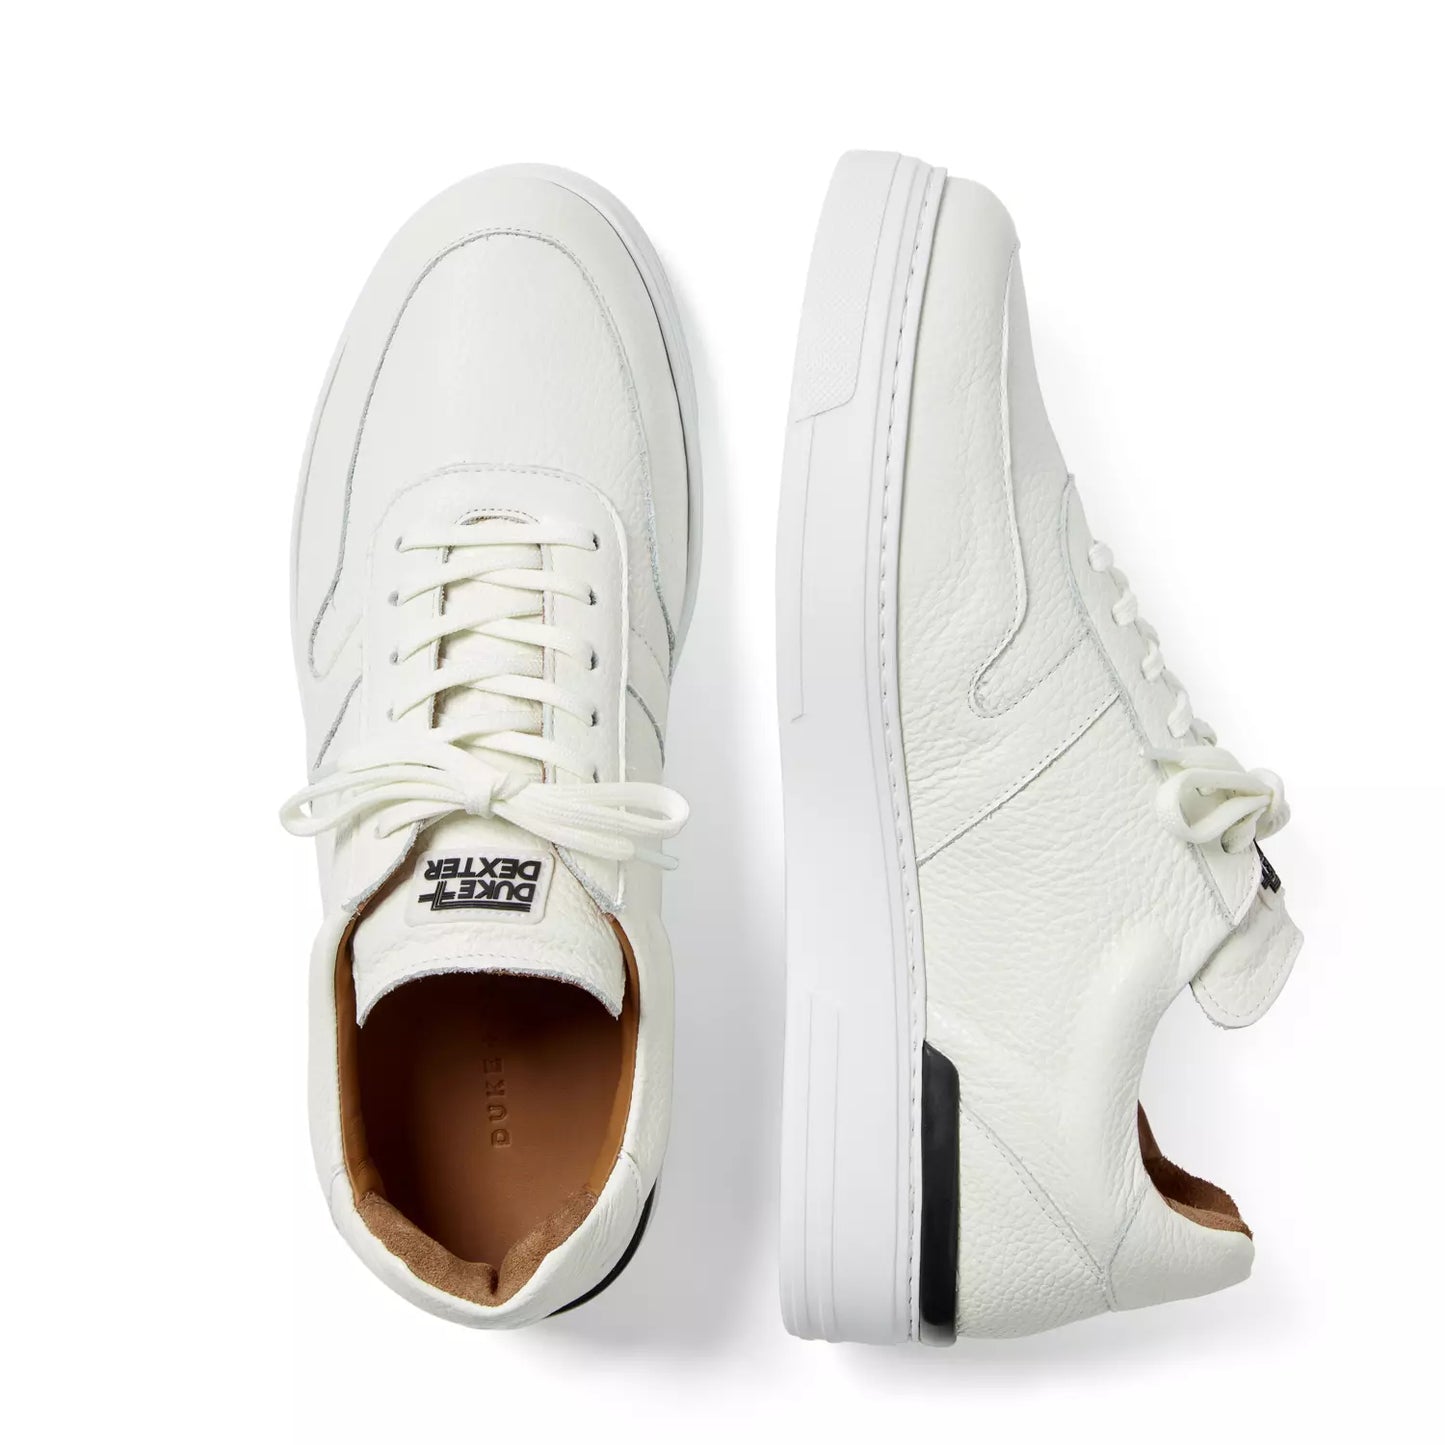 Duke and Dexter Ritchie White leather sneakers for men top view